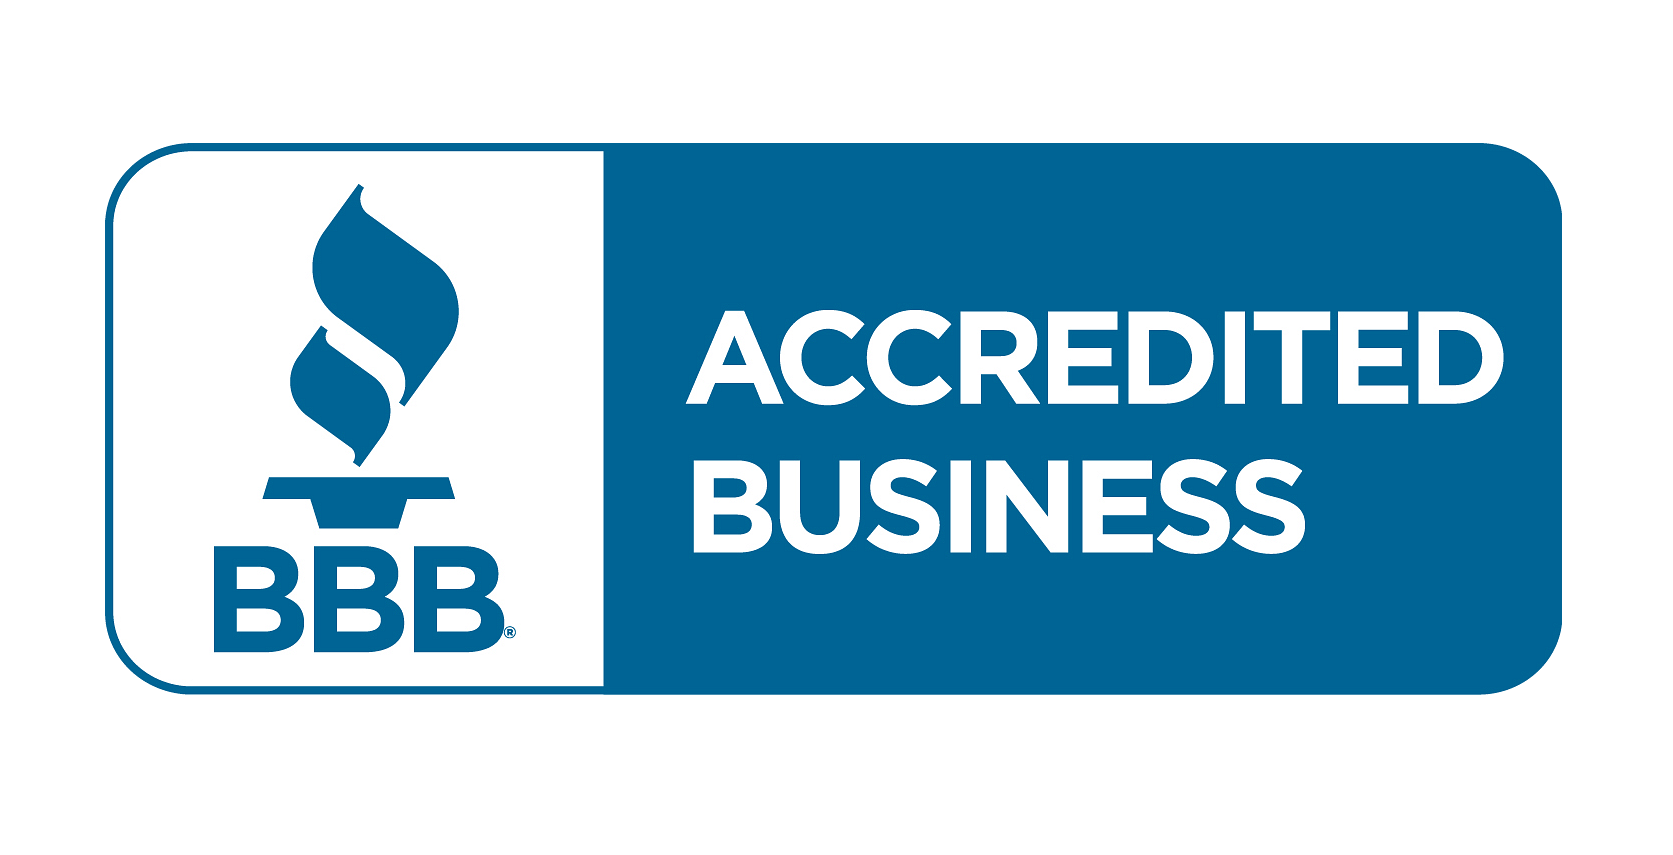 BBB Accredited Business black stamp